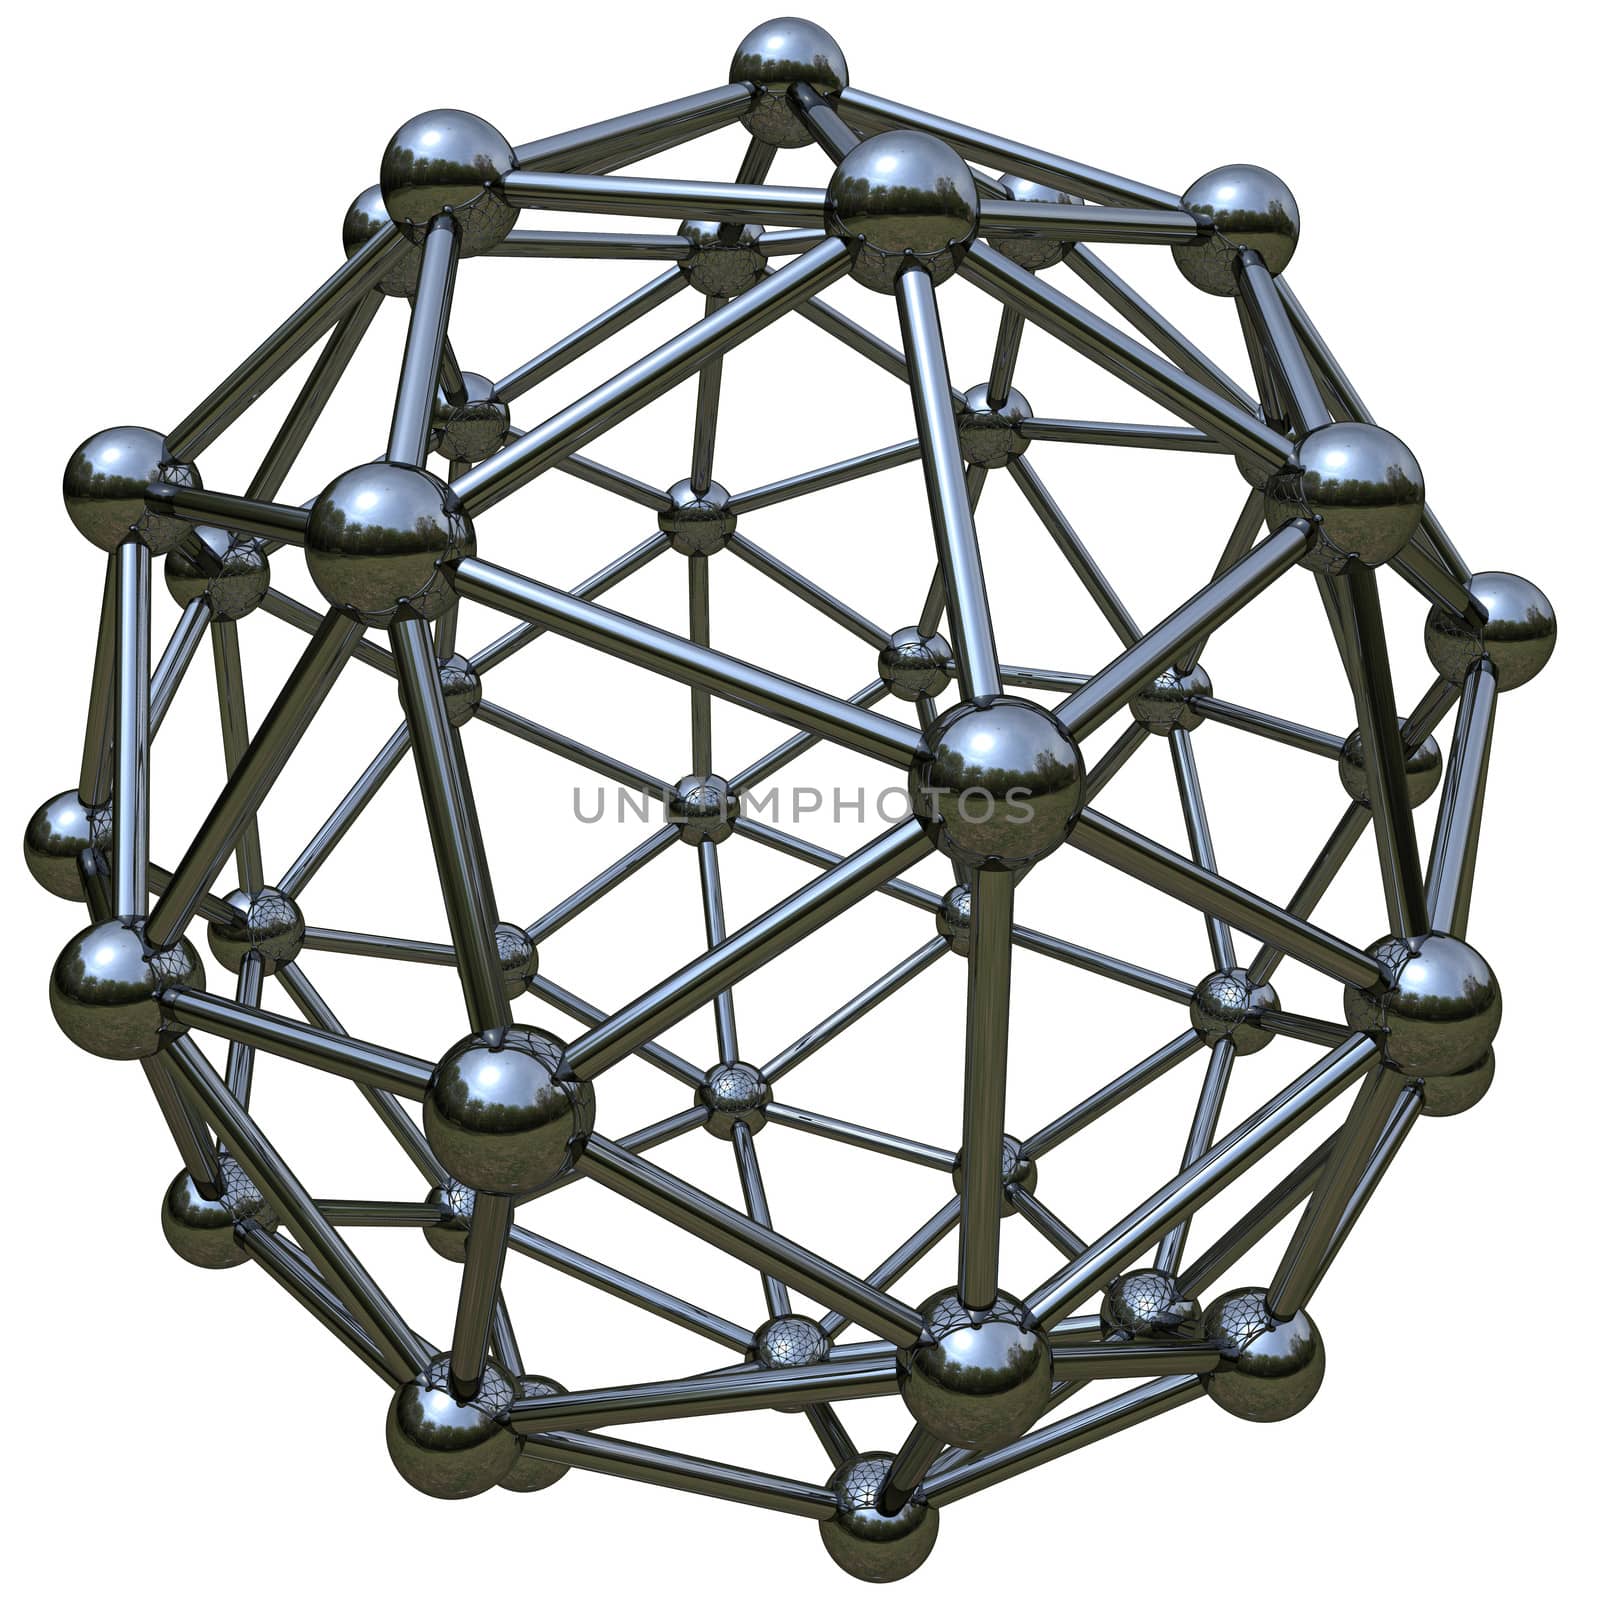 3D simulation of the atom structure isolated with clipping path